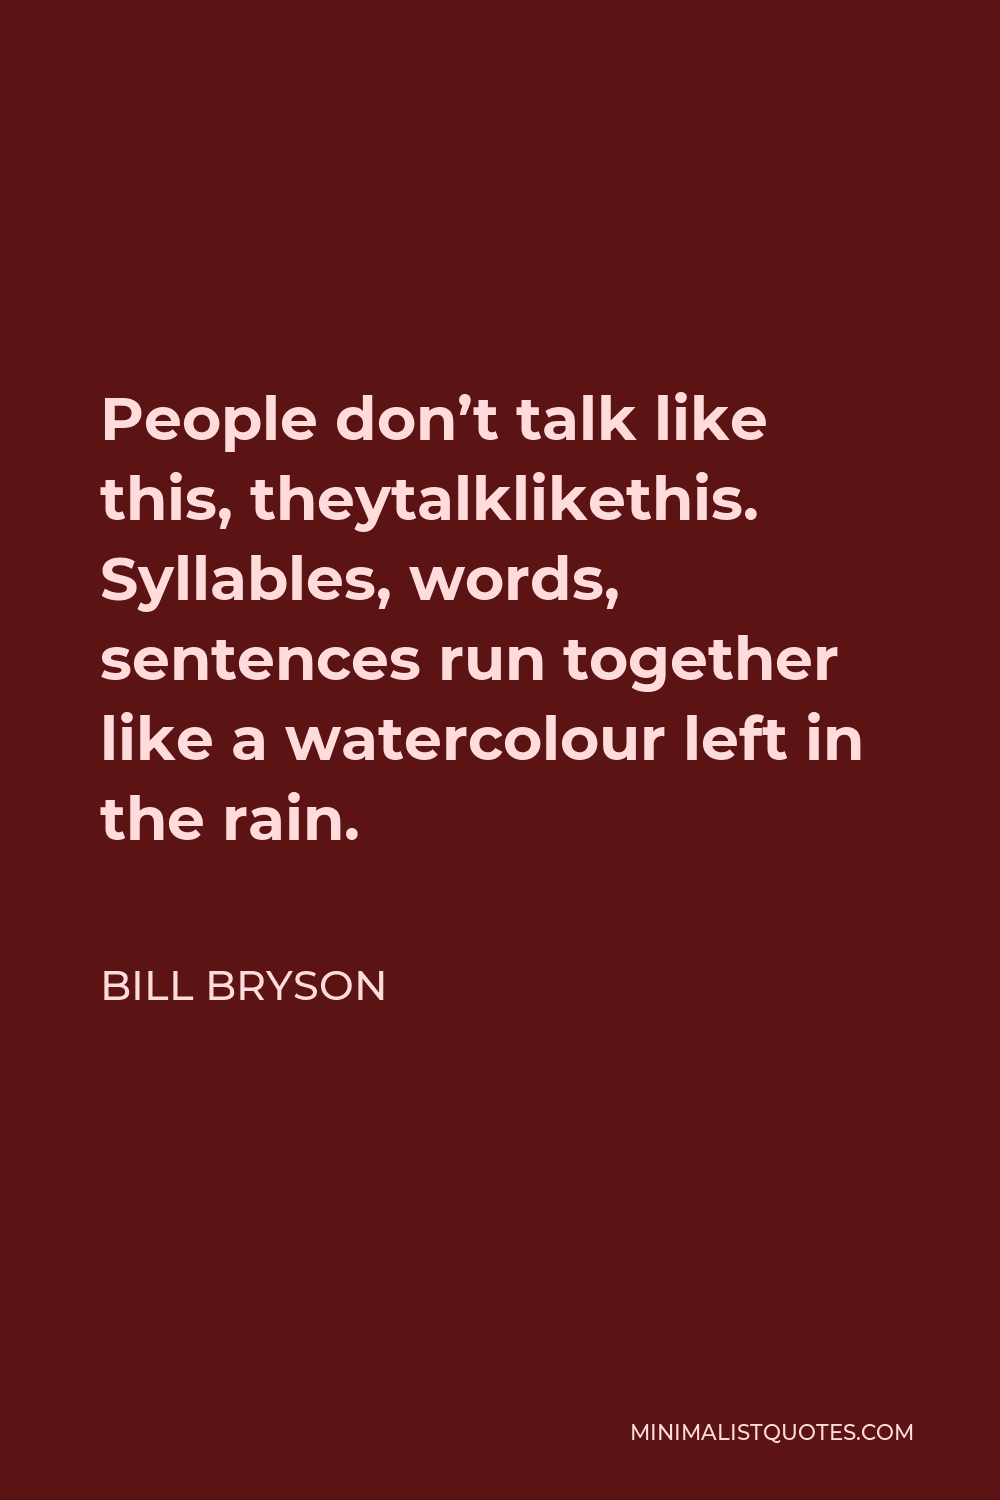 Bill Bryson Quote - People don’t talk like this, theytalklikethis. Syllables, words, sentences run together like a watercolour left in the rain.